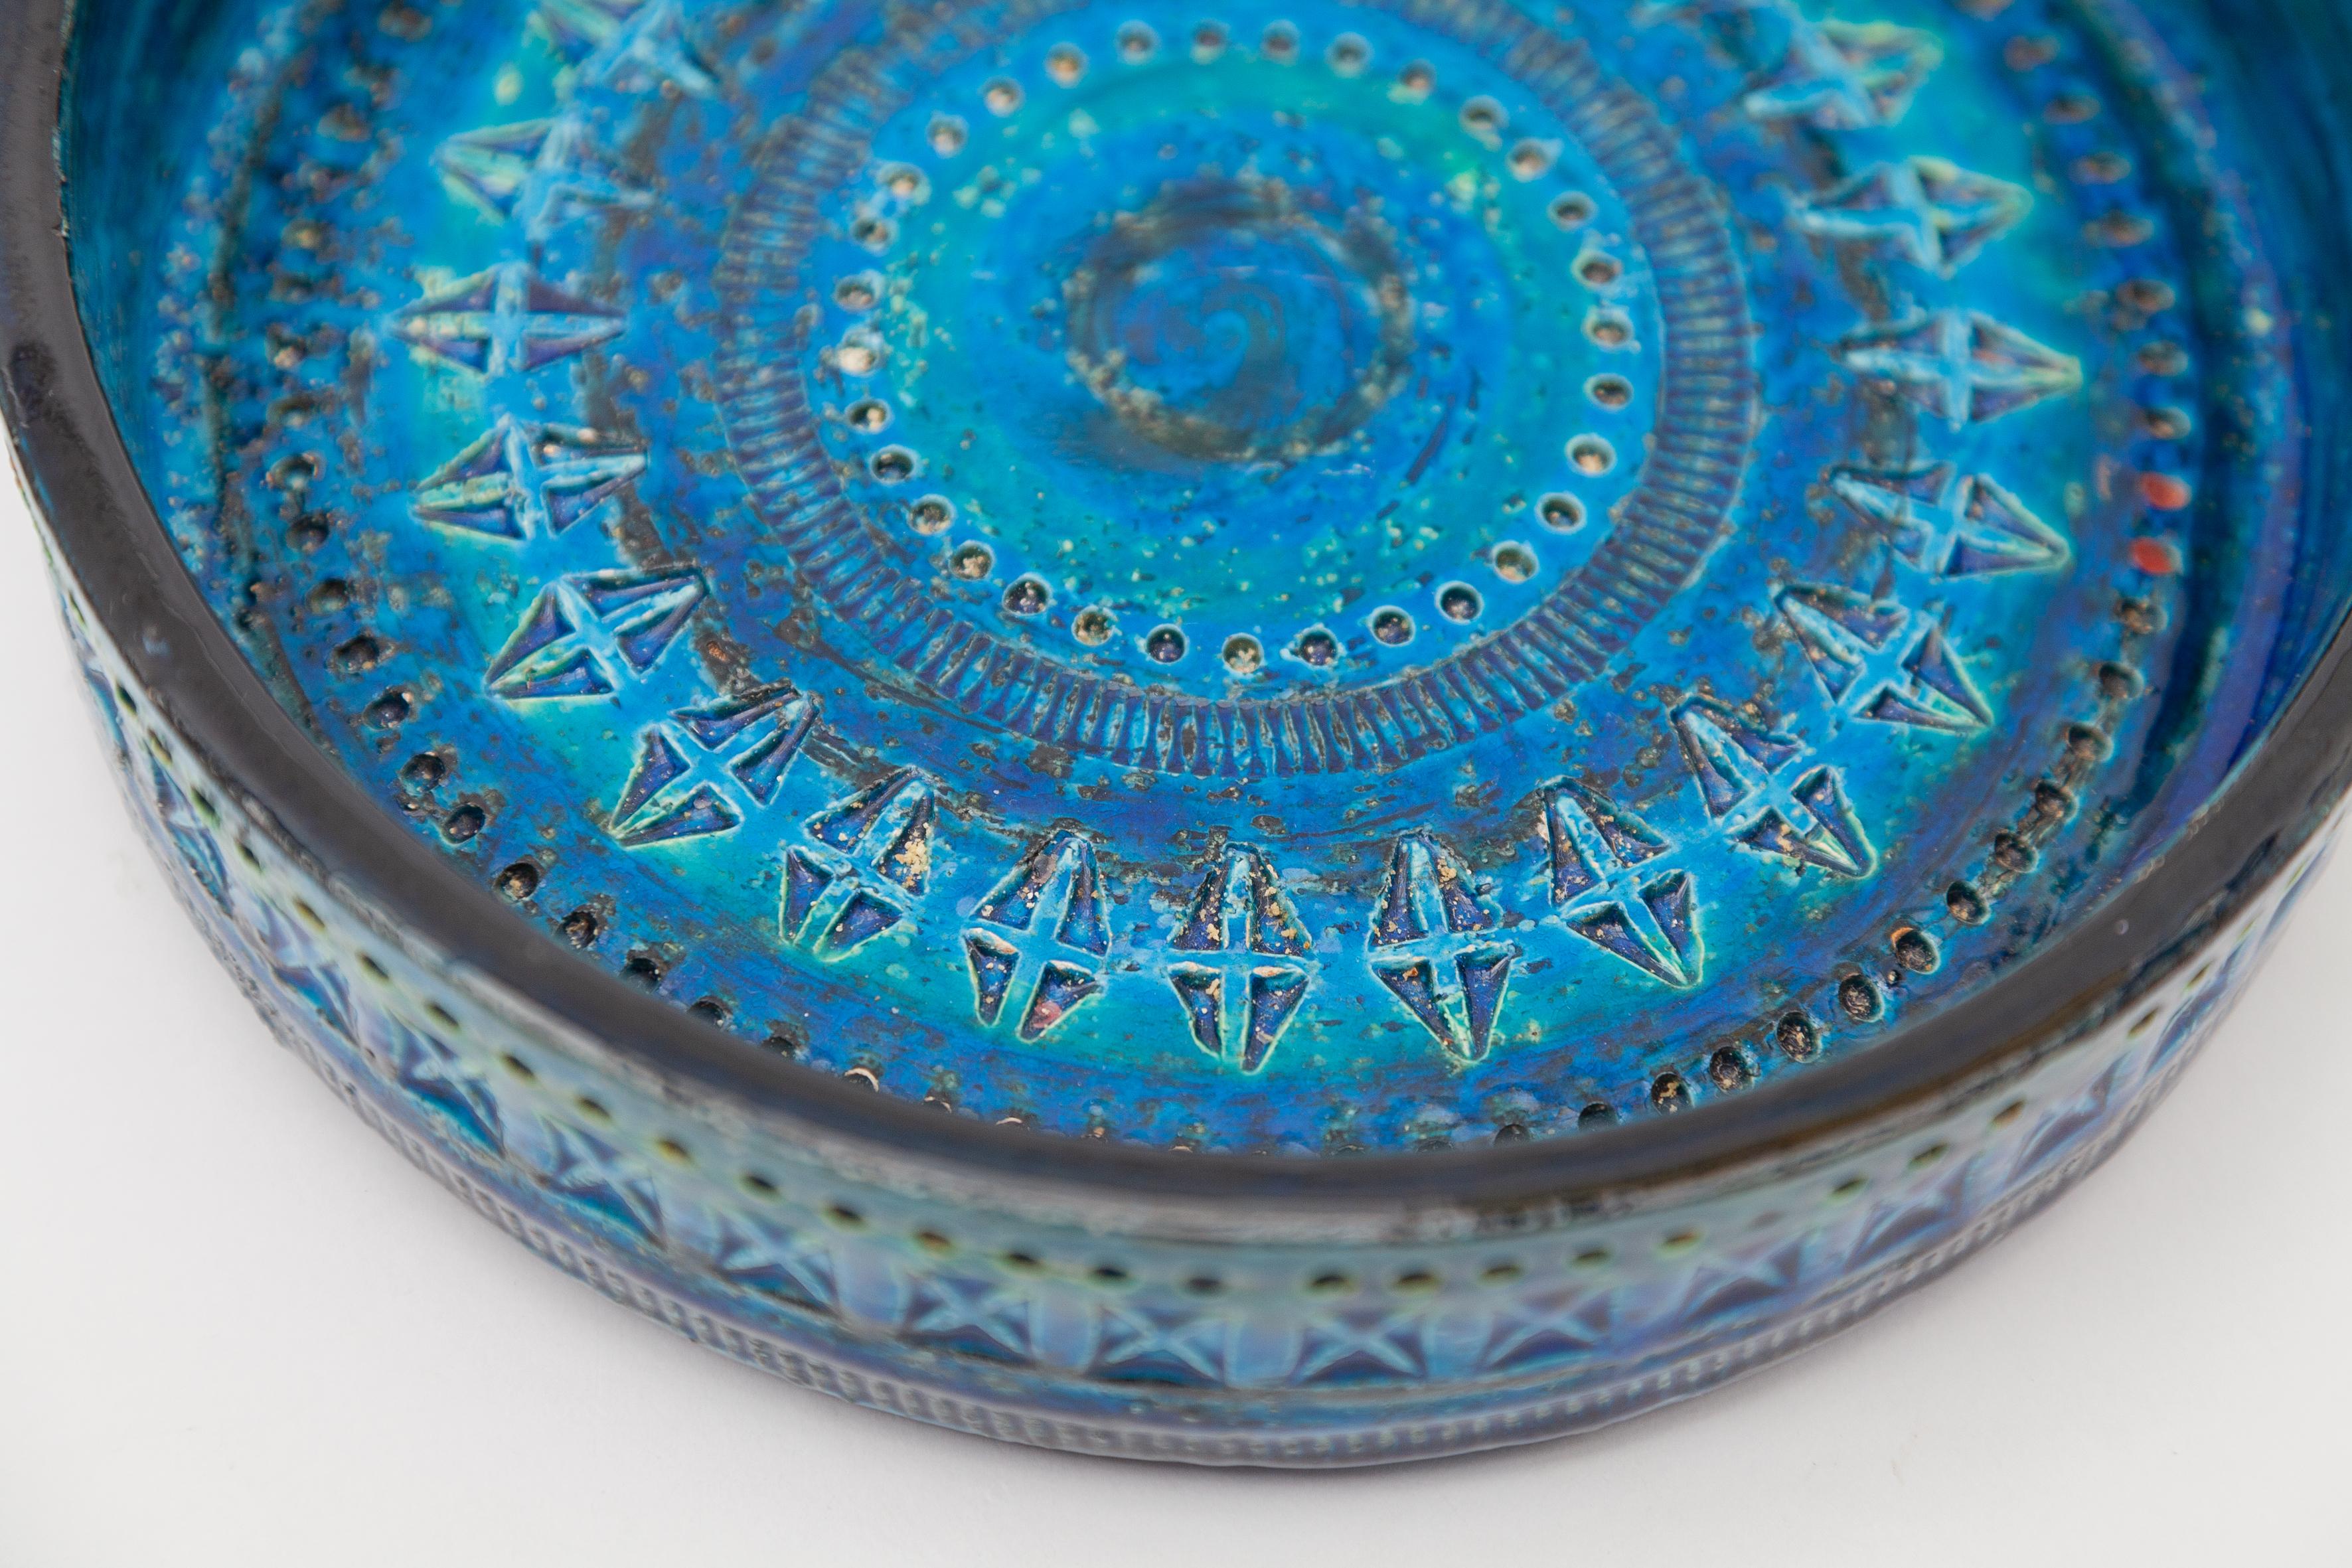 Rimini ceramic platter from the Rimini Blue series with beautiful circles decoration designed by Italian designer Aldo Londi for Bitossi 1960s blue glaze and the typical stamp printing Marked with 742.20 Italy.